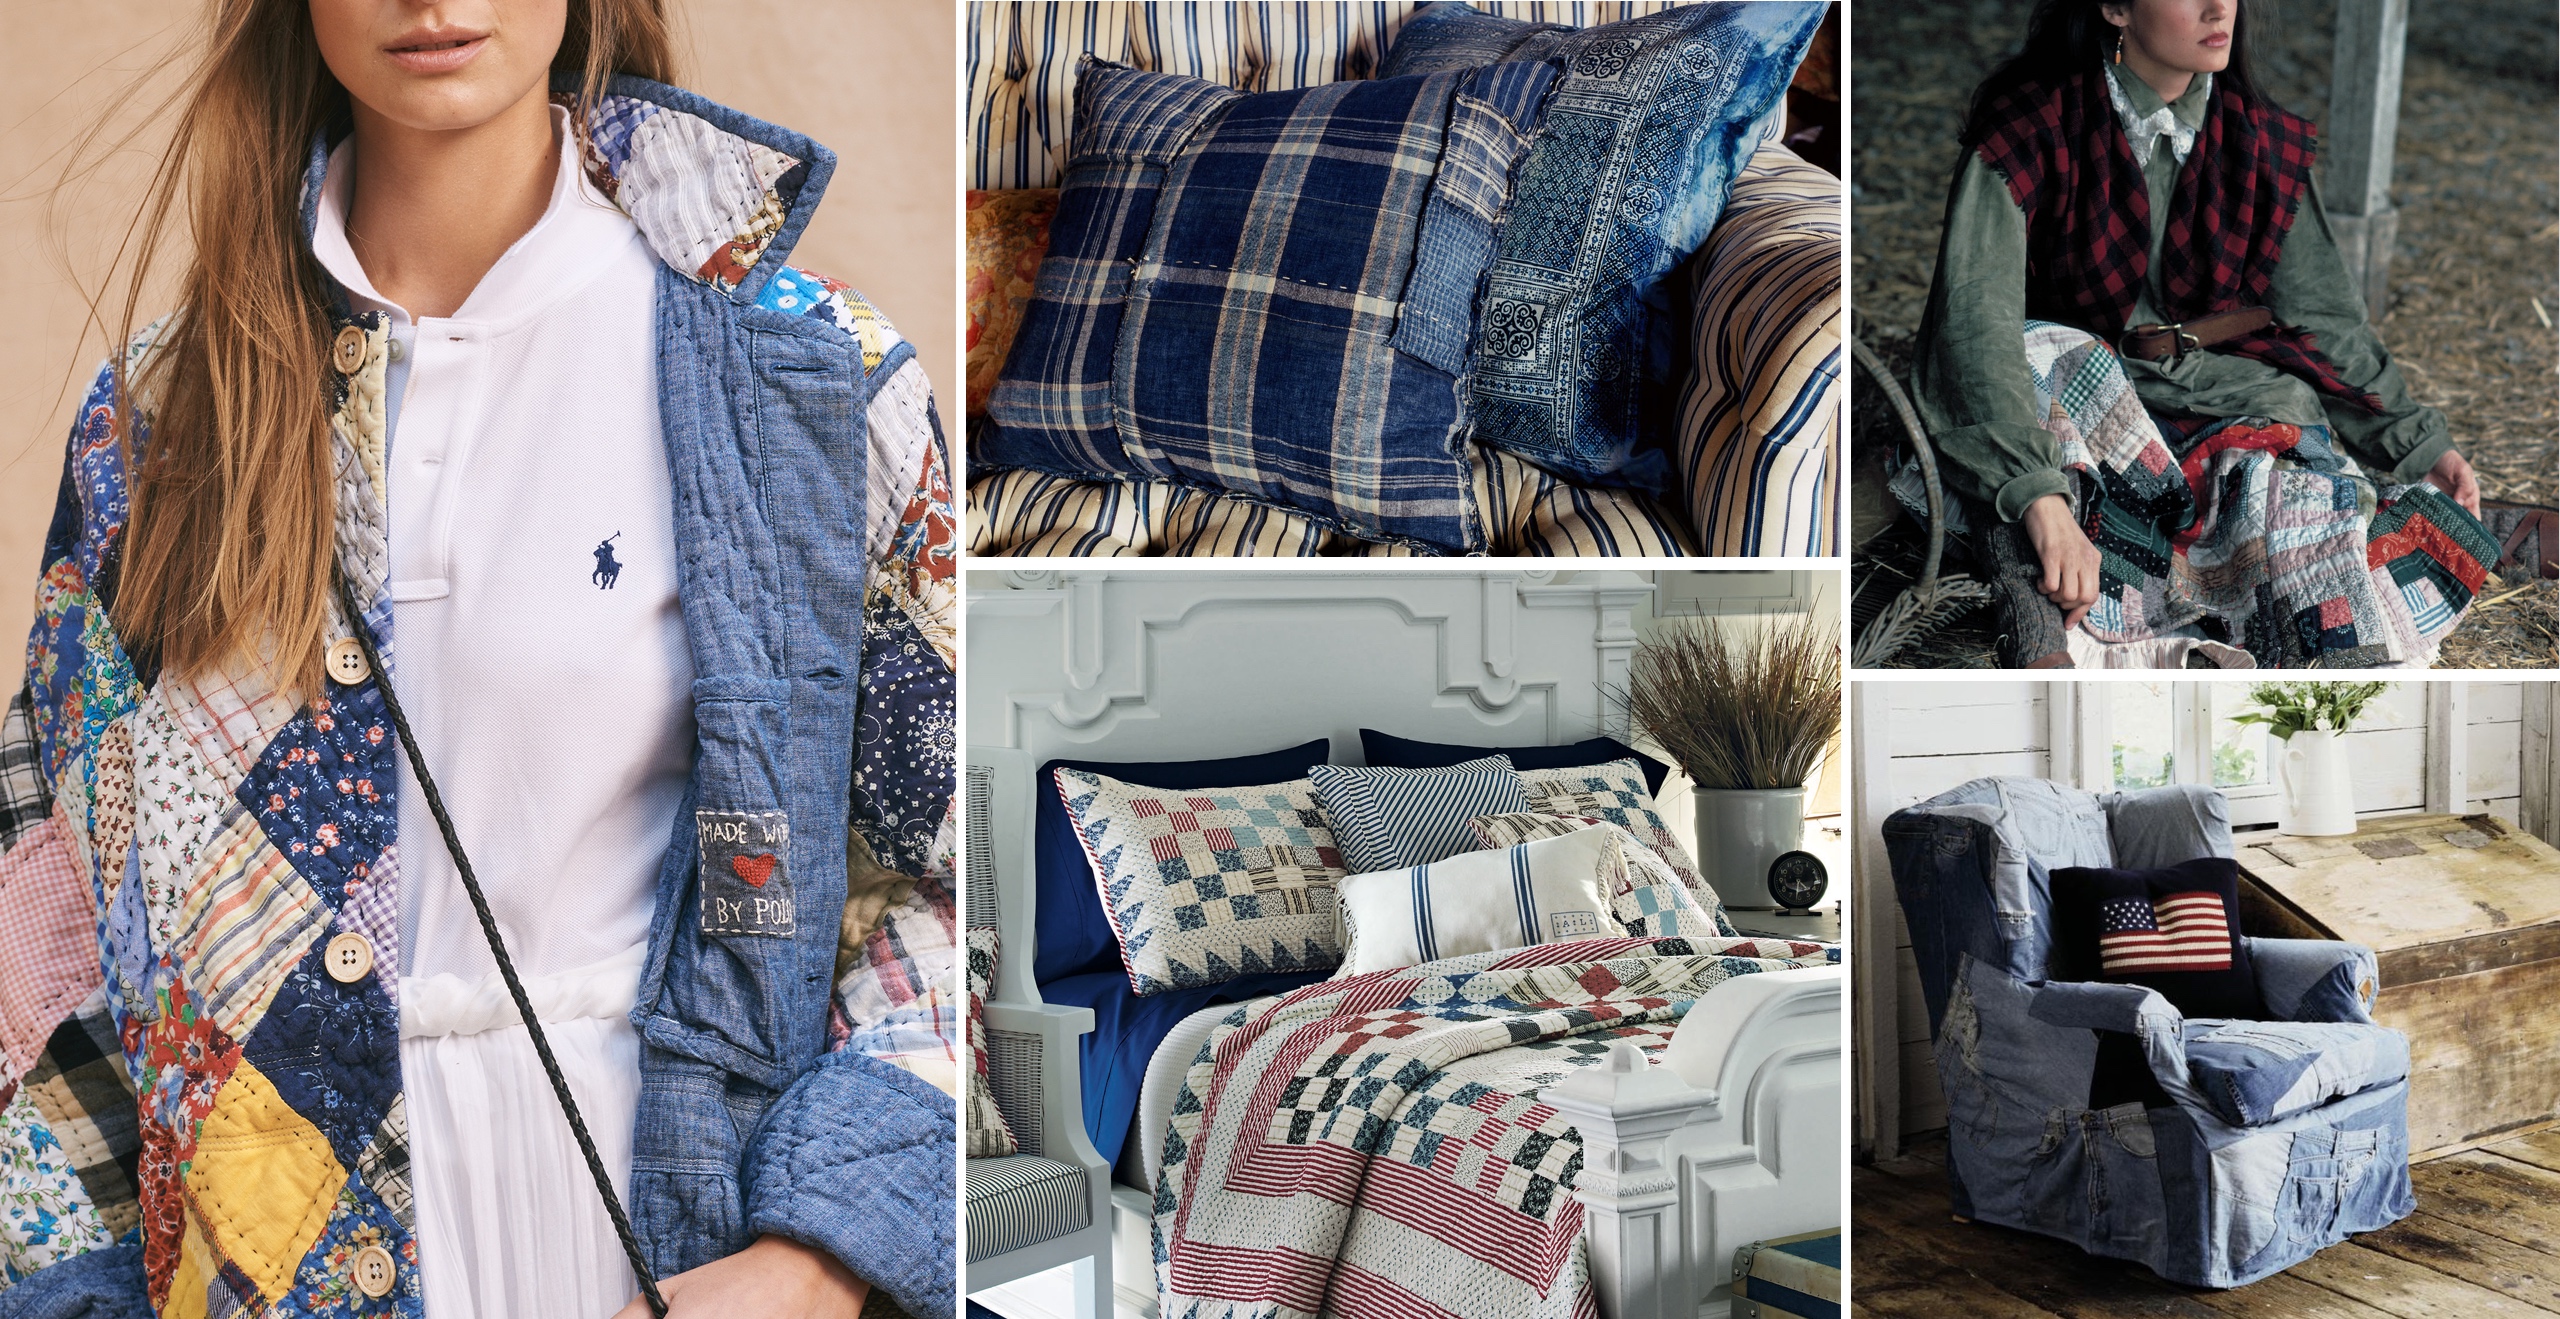 The charm and craft of patchwork celebrated in Ralph Lauren jackets, skirts, pillows, and coverlets,  as well as an armchair covered in a patchwork of vintage blue jeans